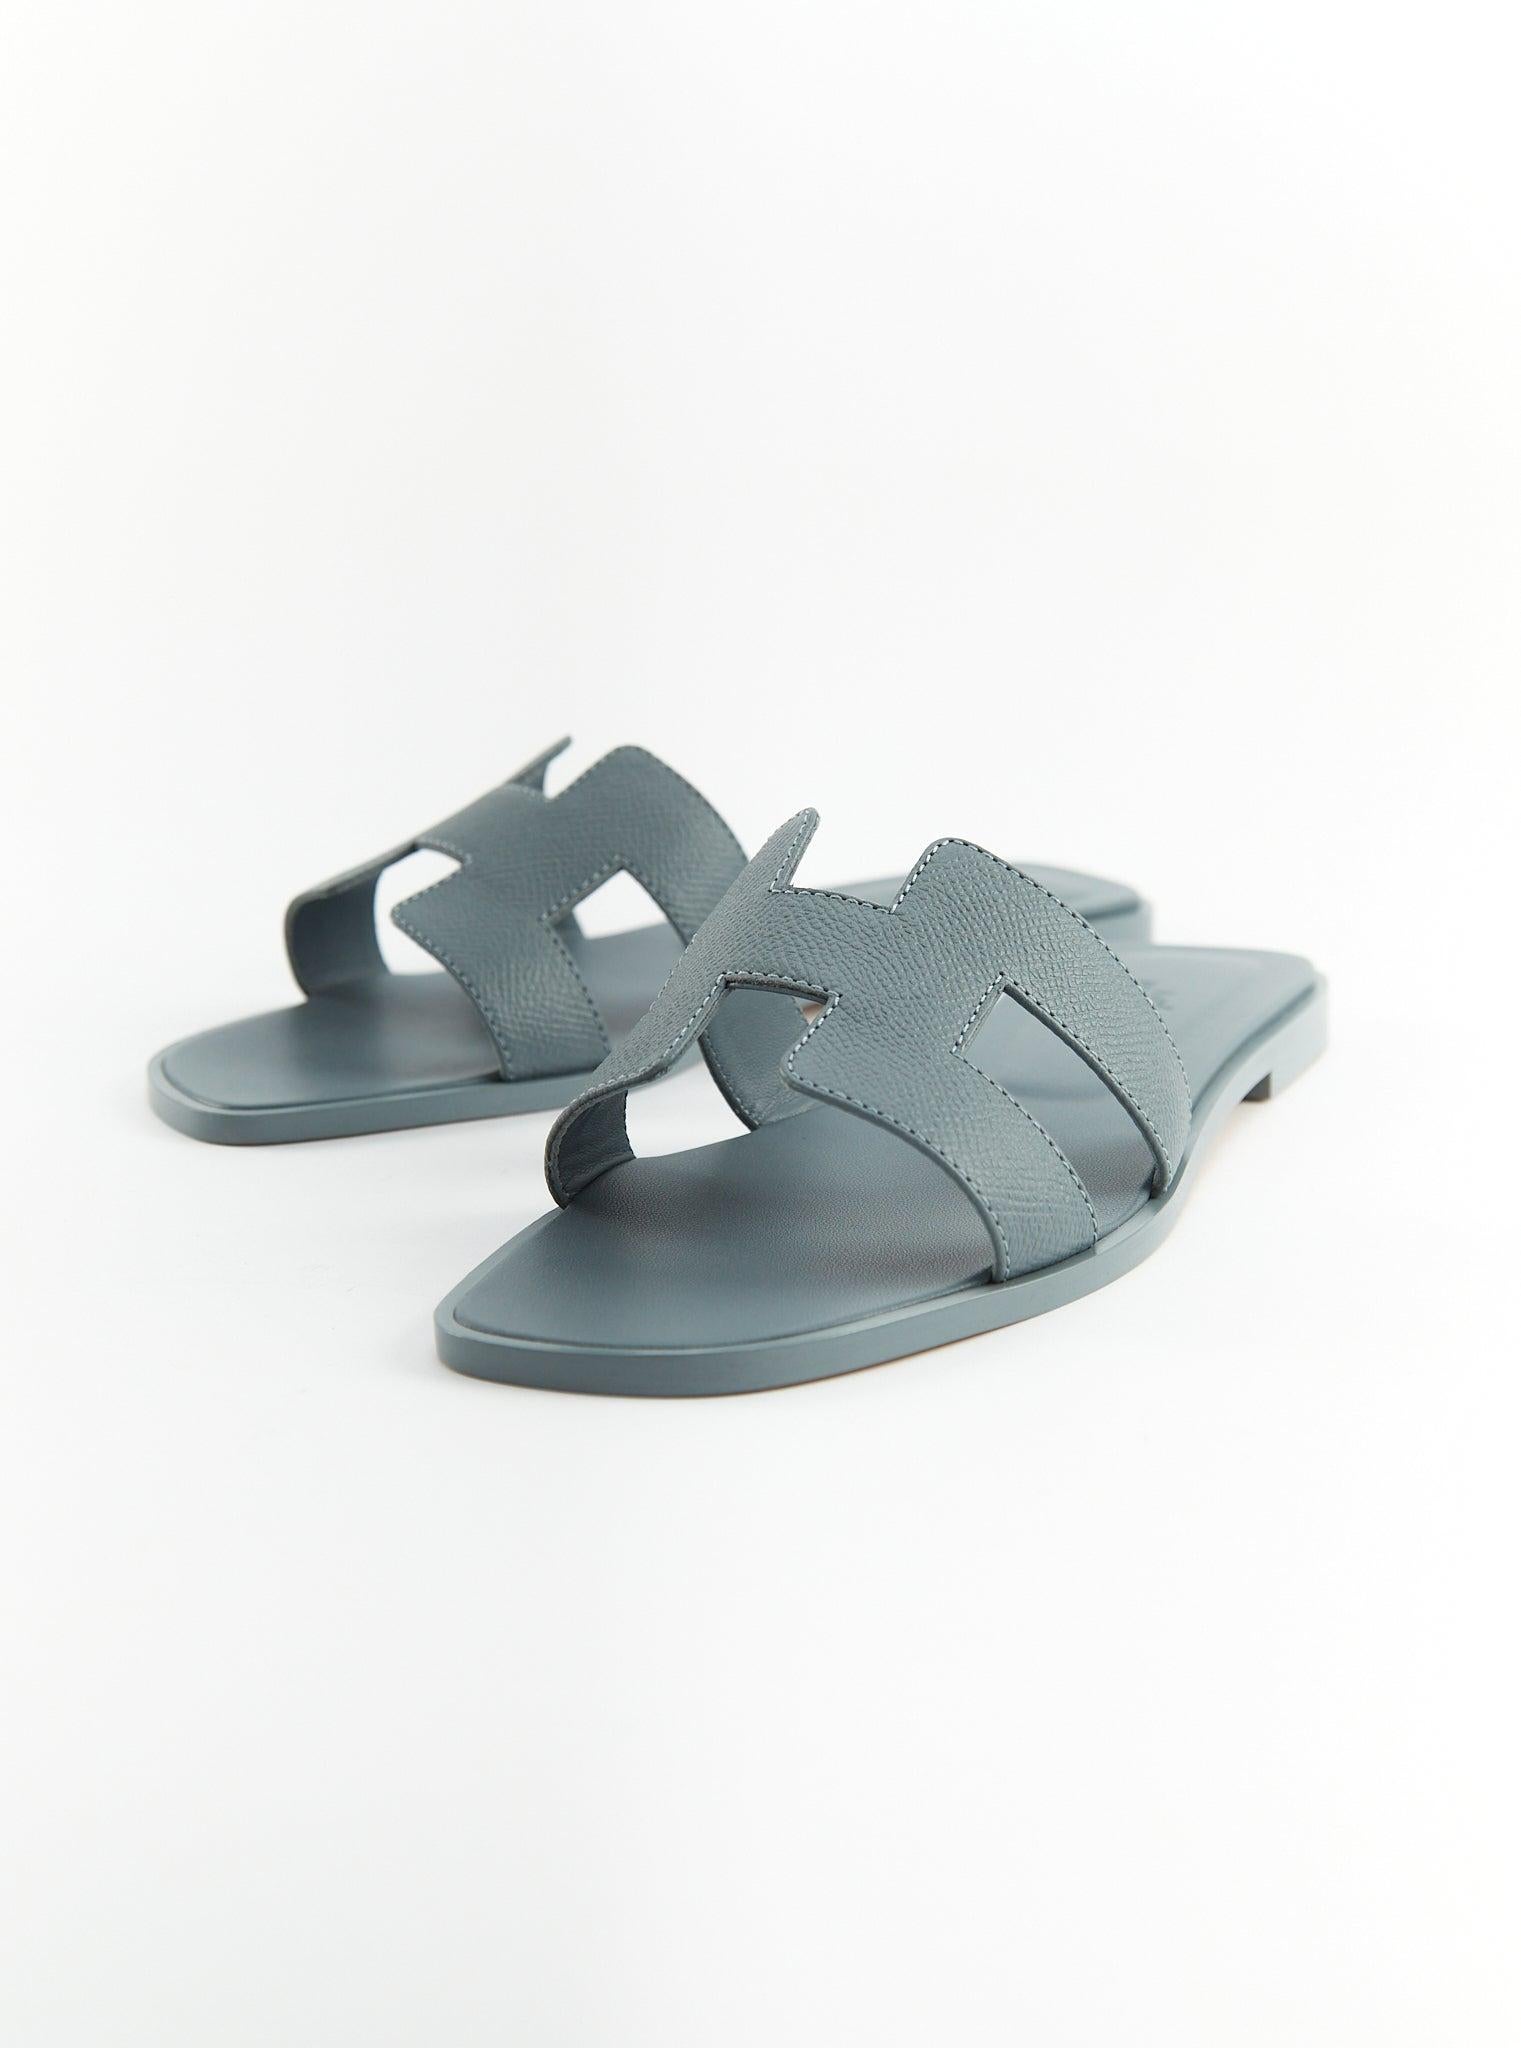 Hermès Oran Sandal in Epsom leather with iconic 